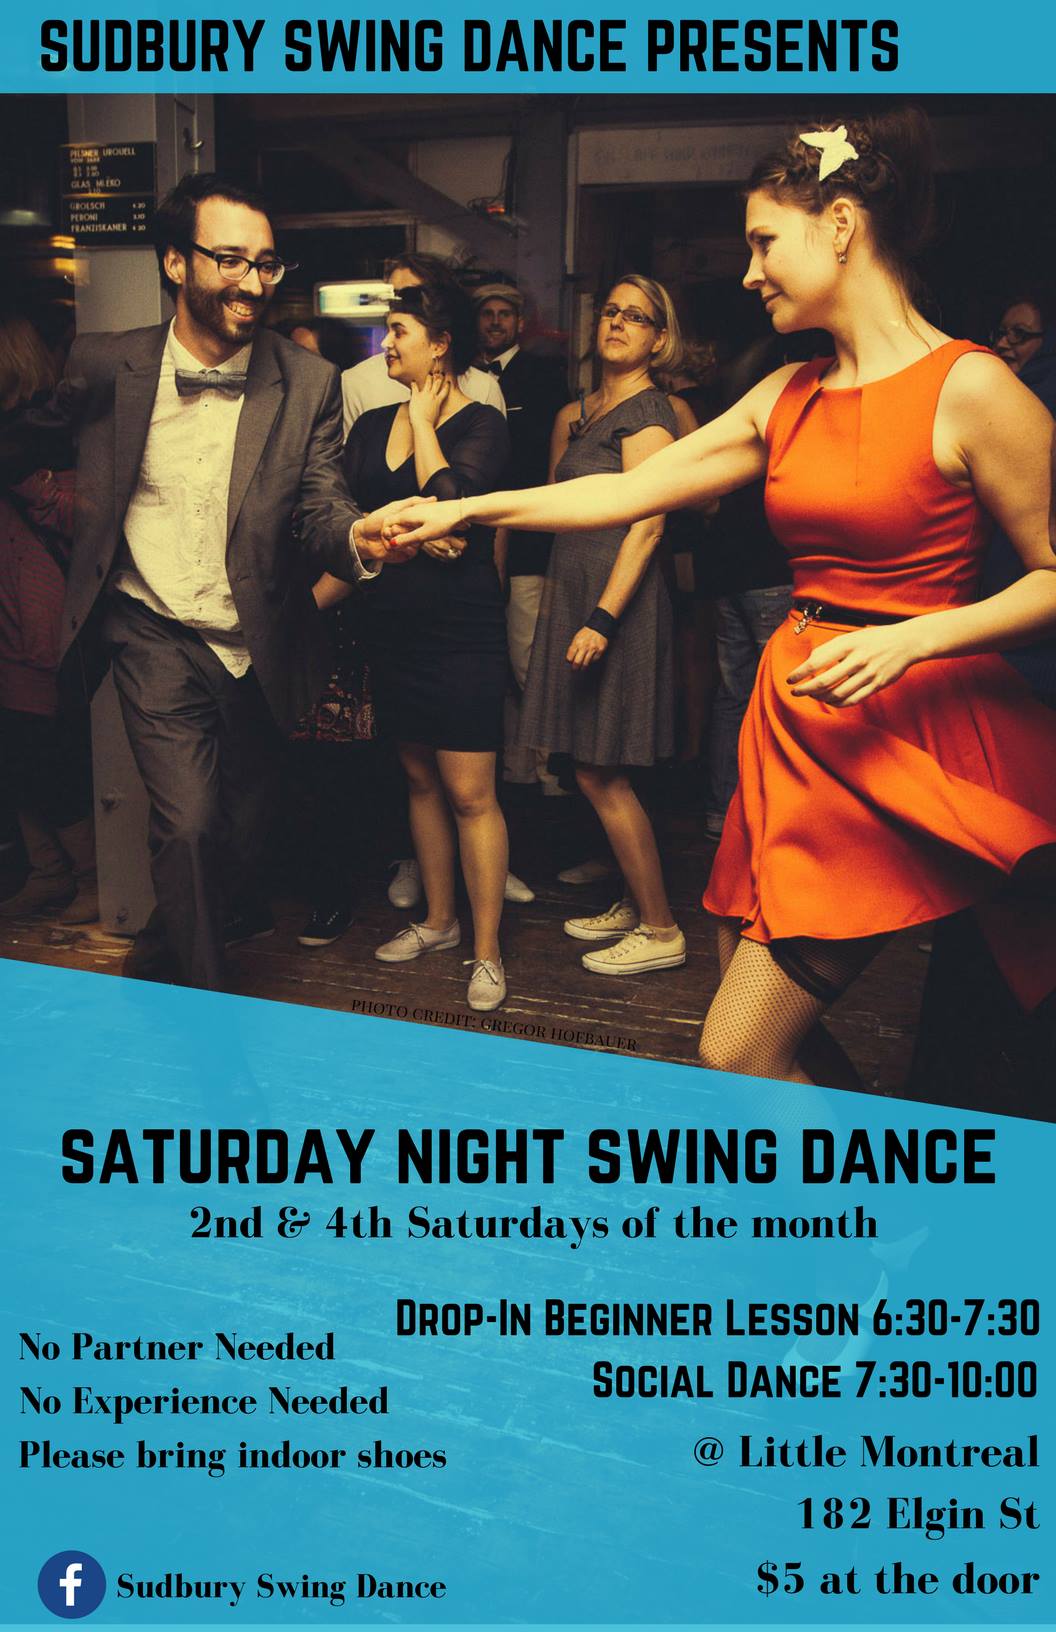 PUT A SWING IN YOUR STEP WITH SUDBURY SWING DANCE